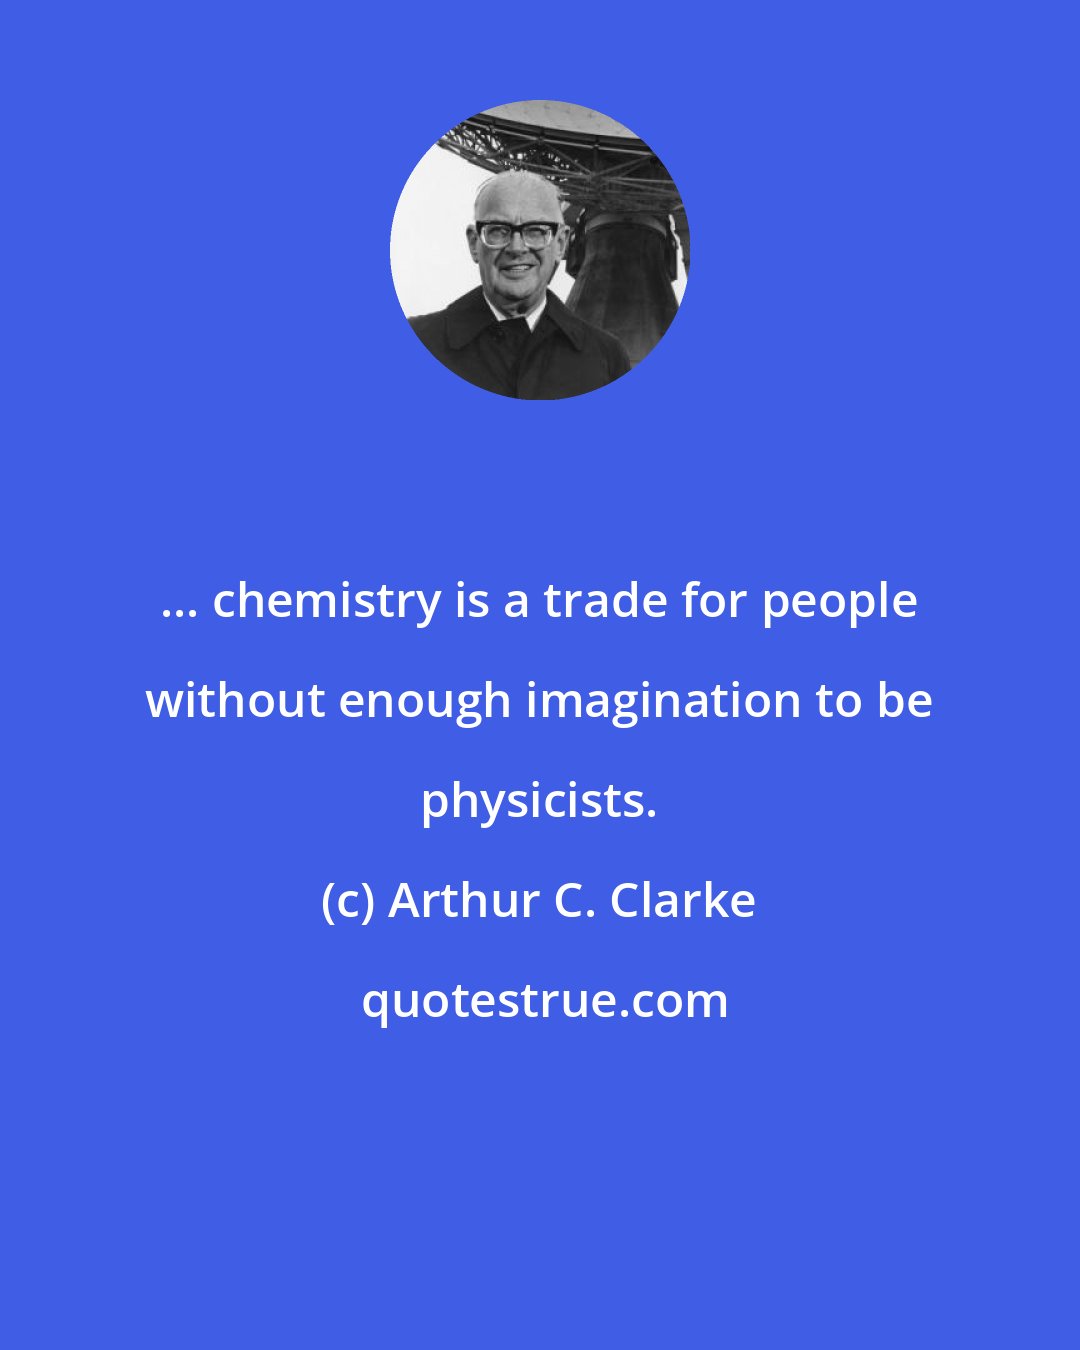 Arthur C. Clarke: ... chemistry is a trade for people without enough imagination to be physicists.